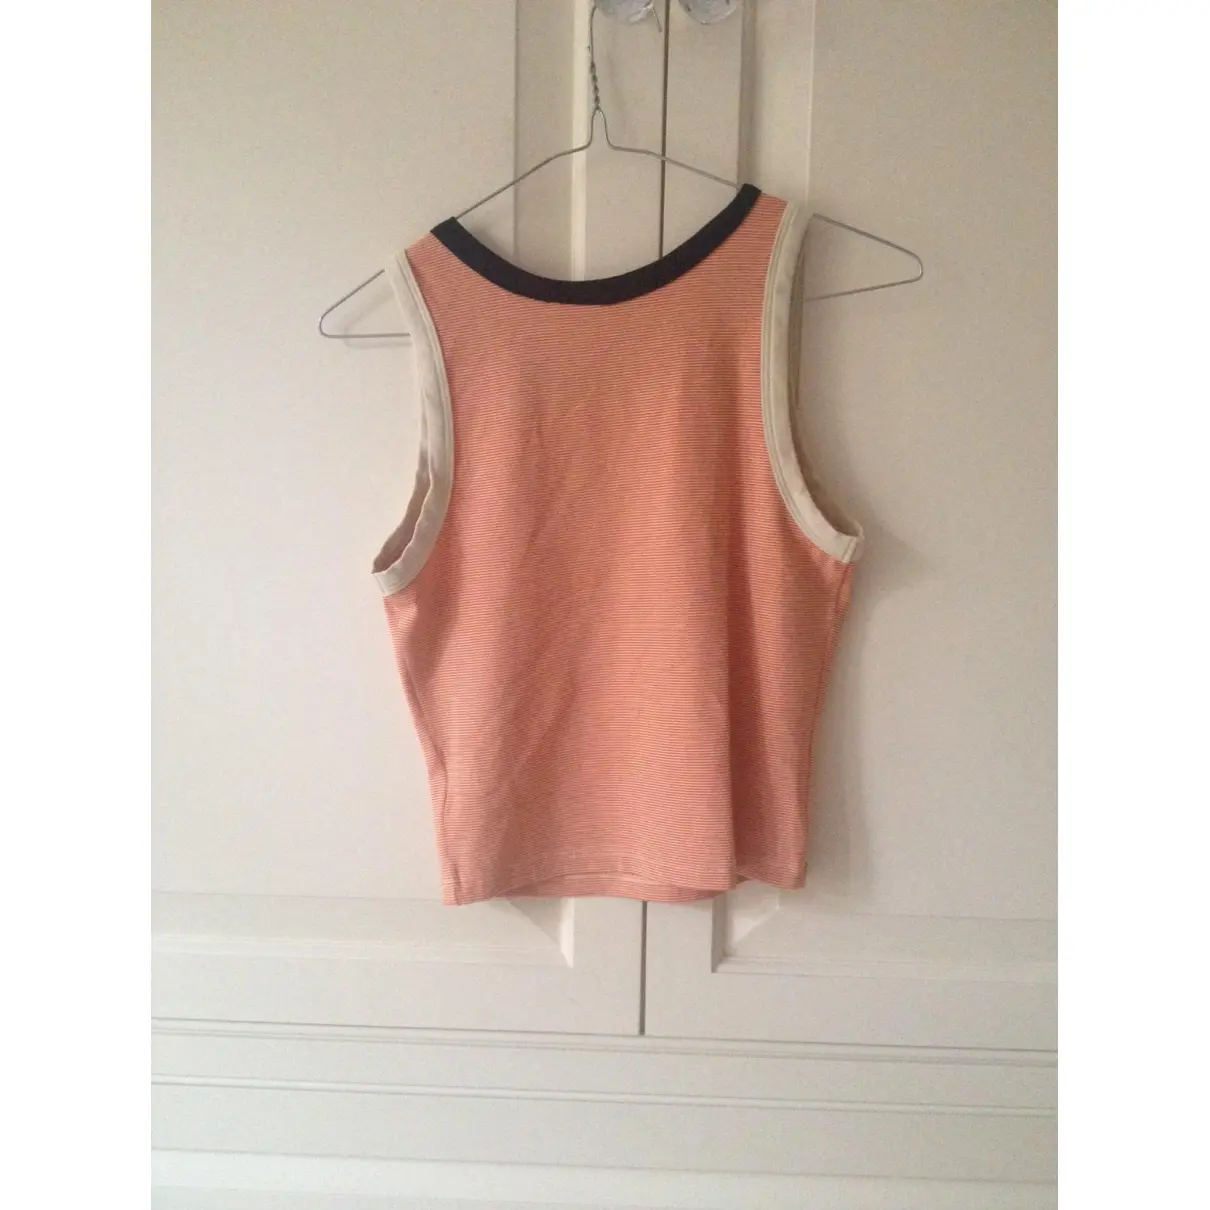 Kain Top for sale